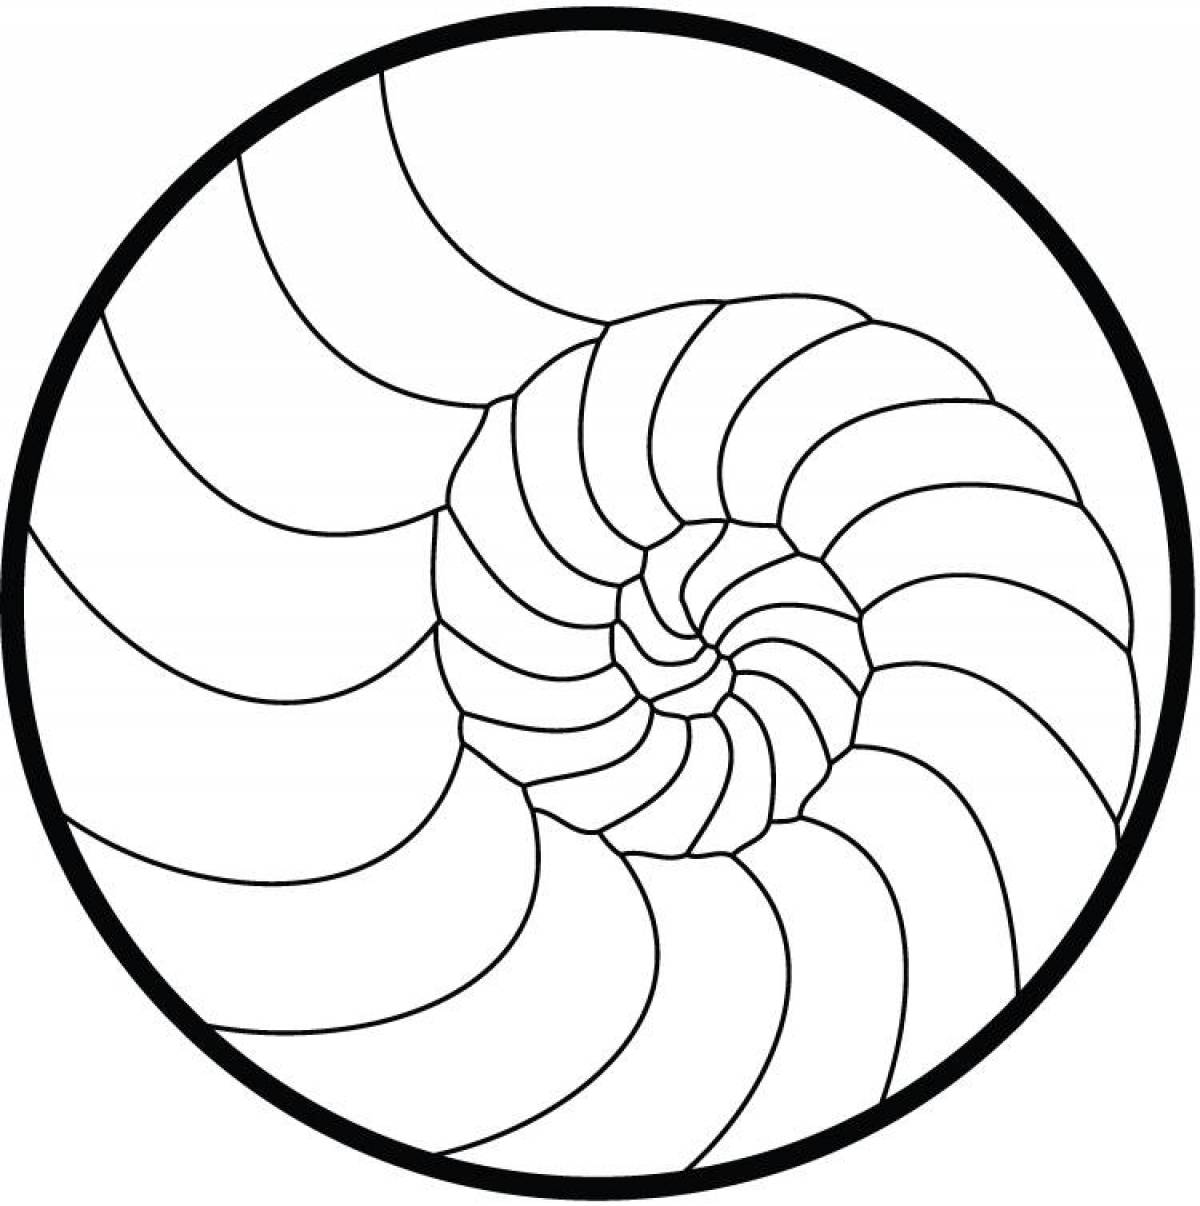 Awesome spiral coloring